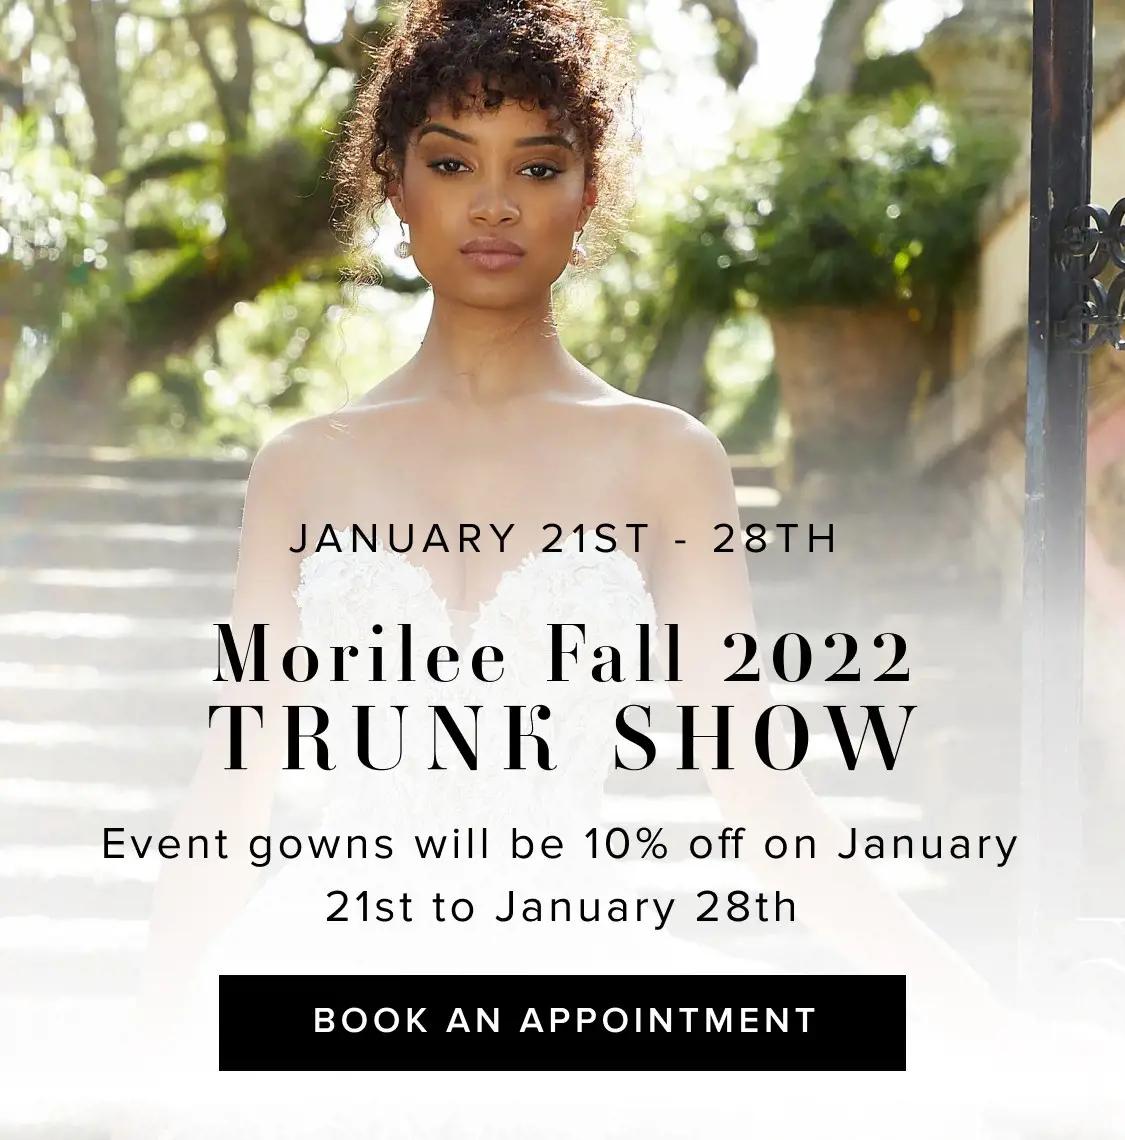 "Morilee Fall 2022 Trunk Show" banner for mobile